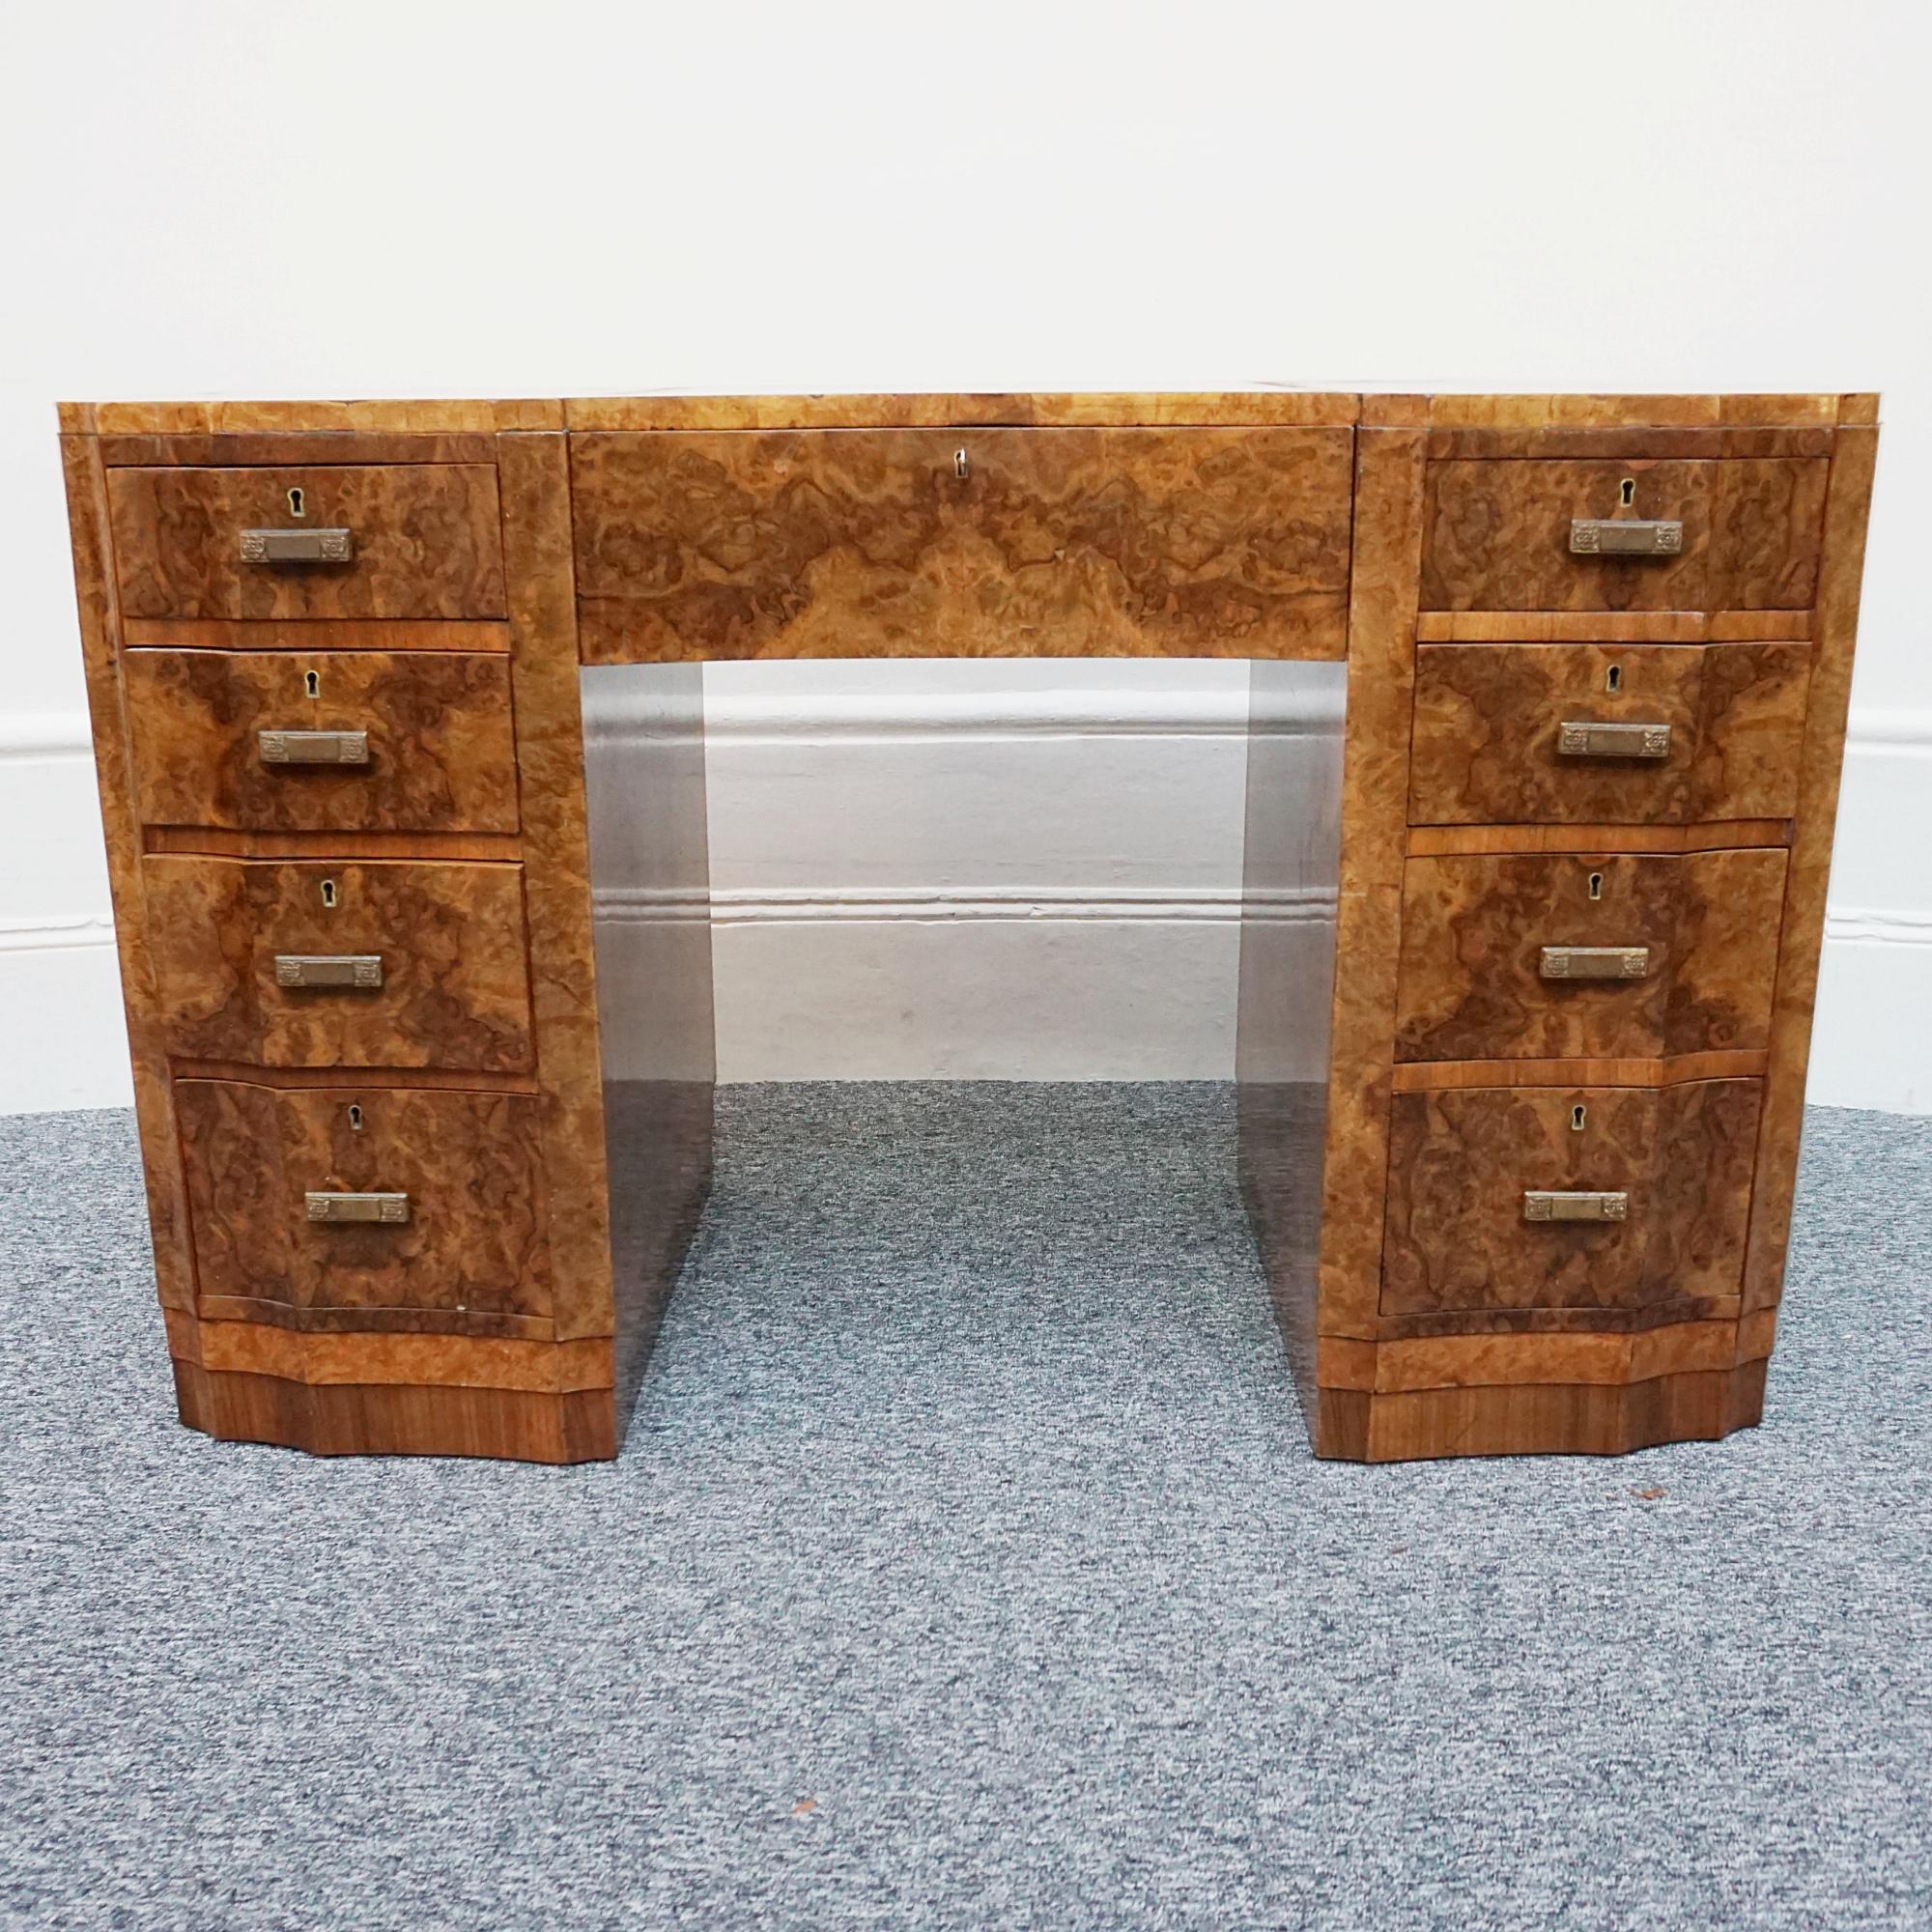 An Art Deco Kidney Shaped. Burr Walnut Desk In Good Condition For Sale In Forest Row, East Sussex